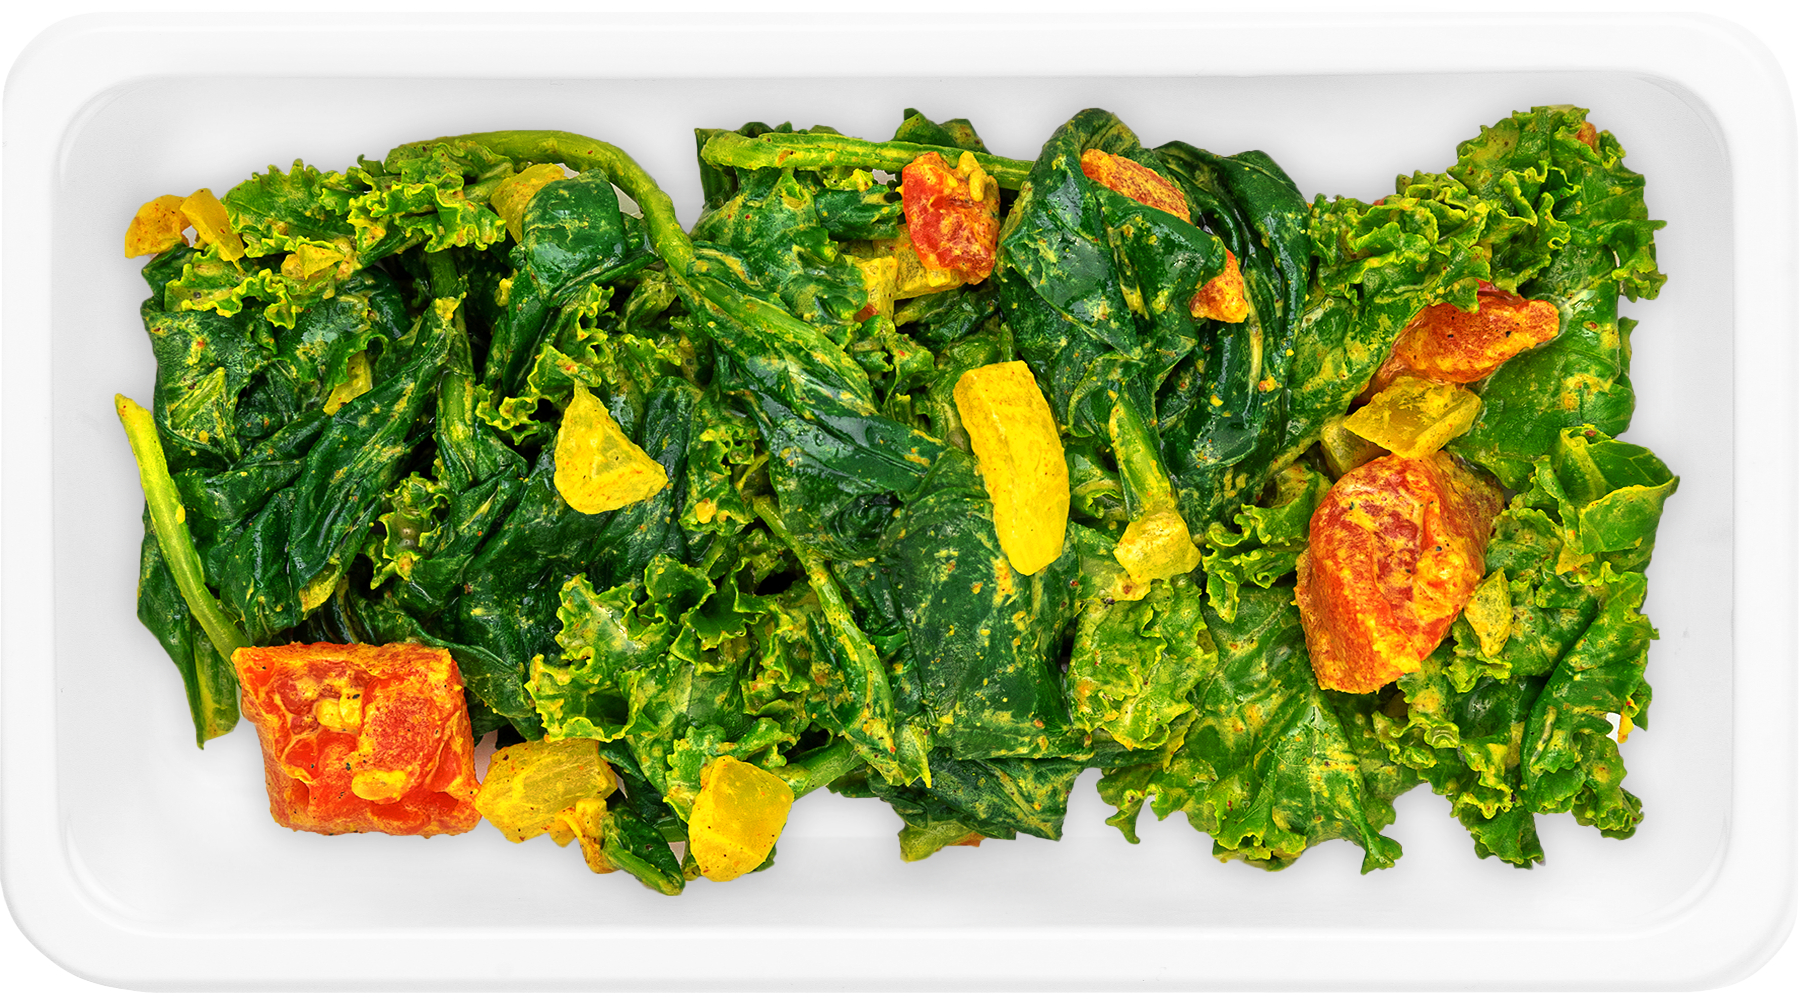 Indian Spiced Spinach and Kale